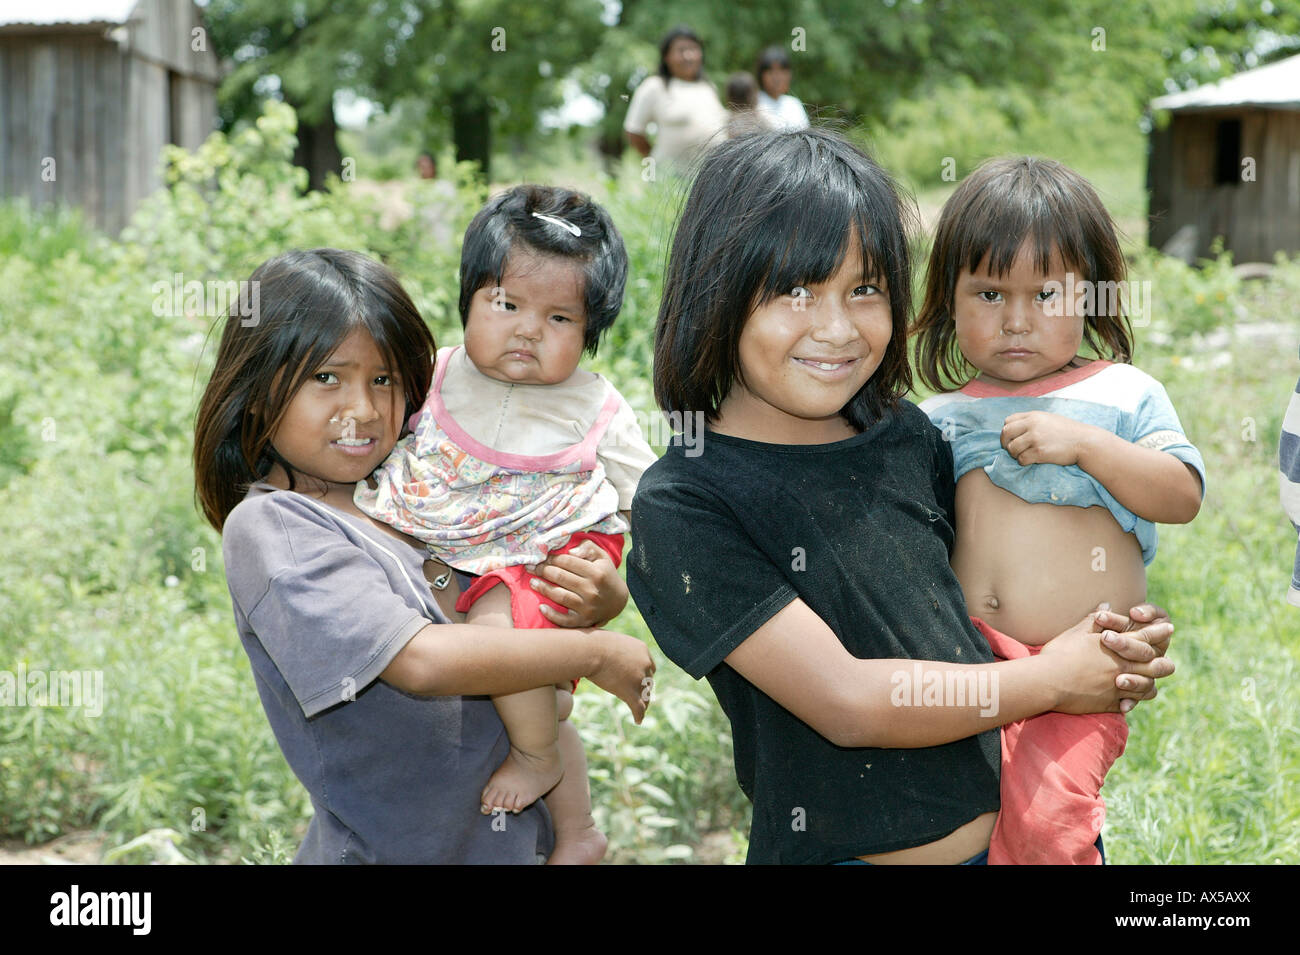 Two girls with children on their arms, Nivaclé Indians, Jothoisha, Chaco, Paraguay, South America Stock Photo